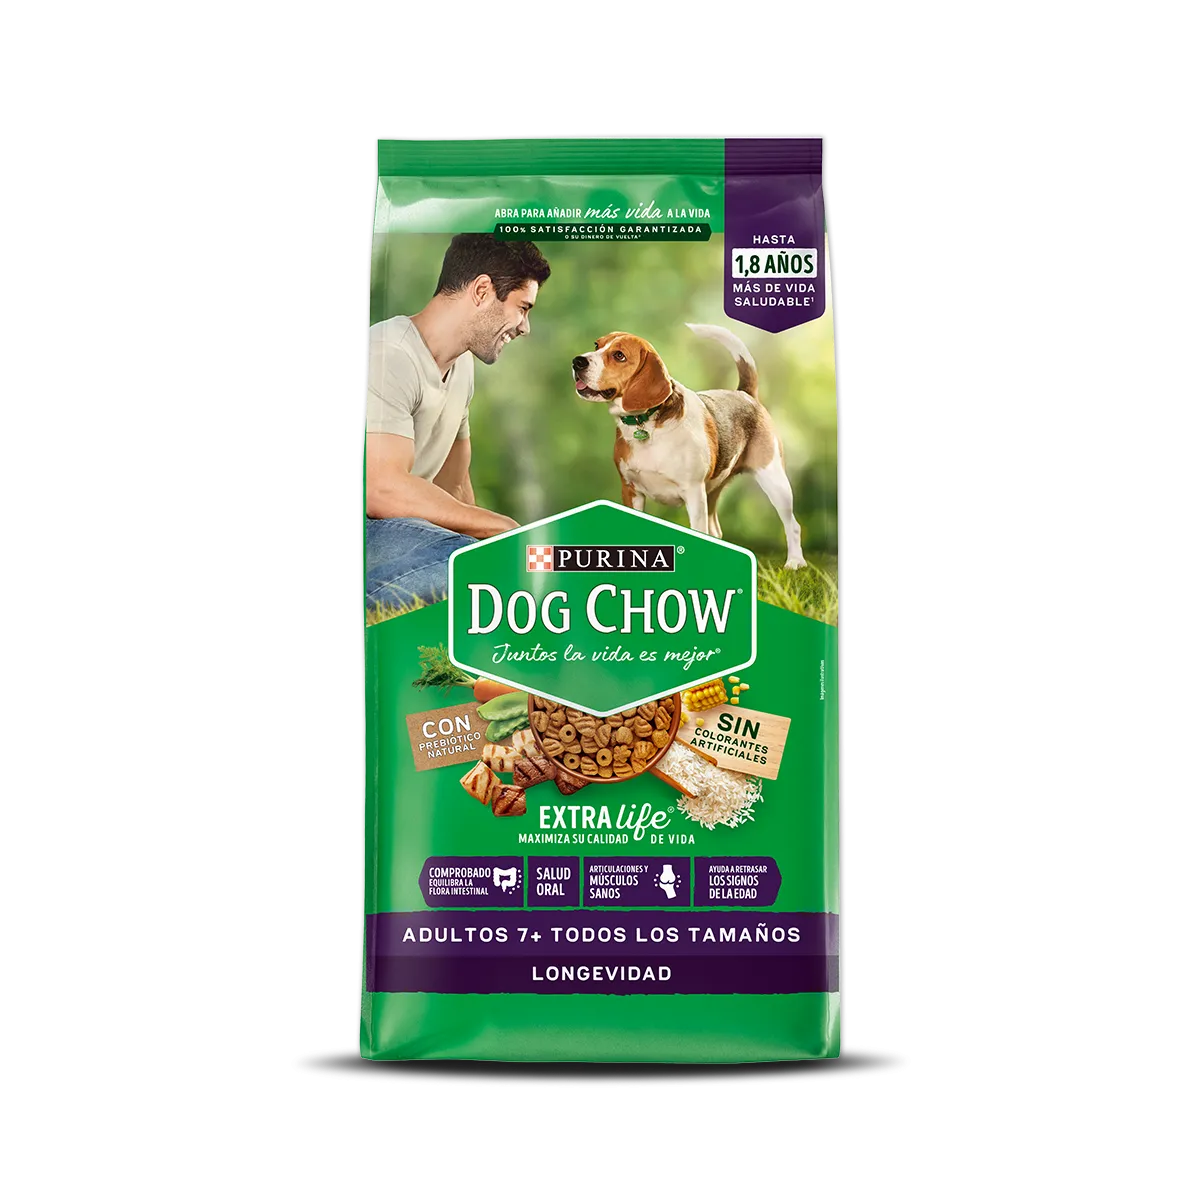 Purina-DogChow-adultos7%2Bcolombia.png.webp